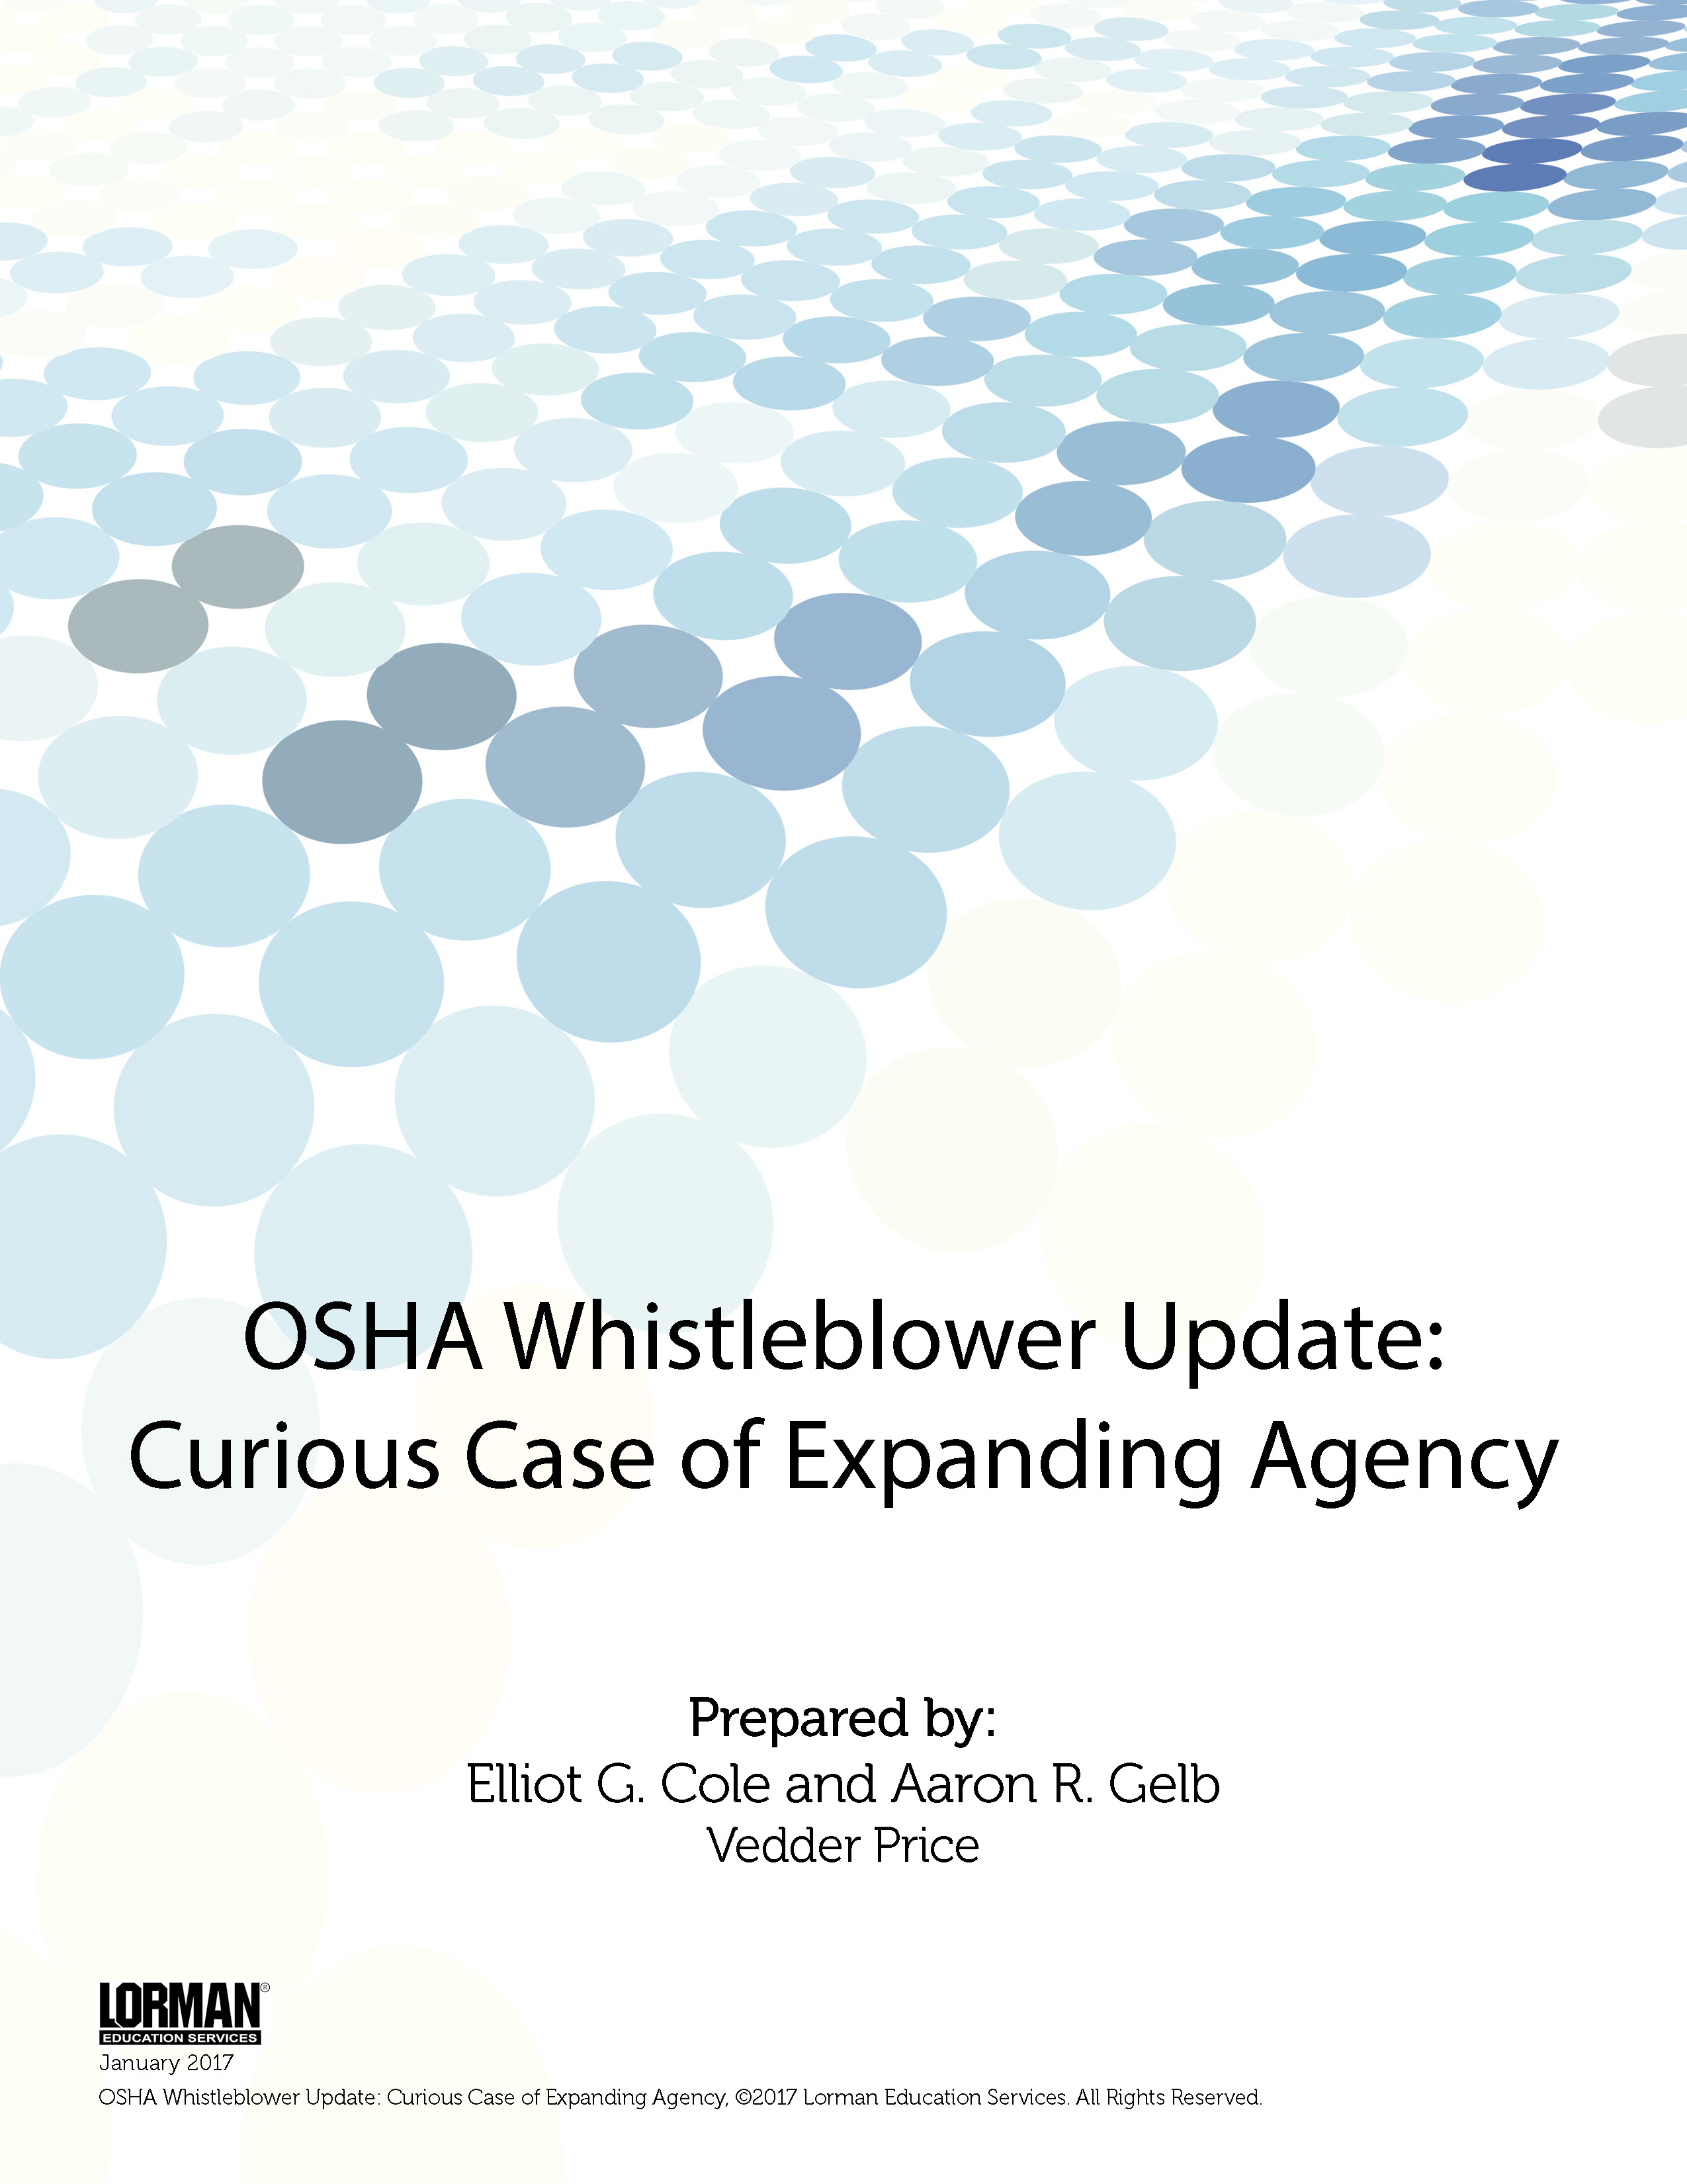 OSHA Whistleblower Update: Curious Case of Expanding Agency